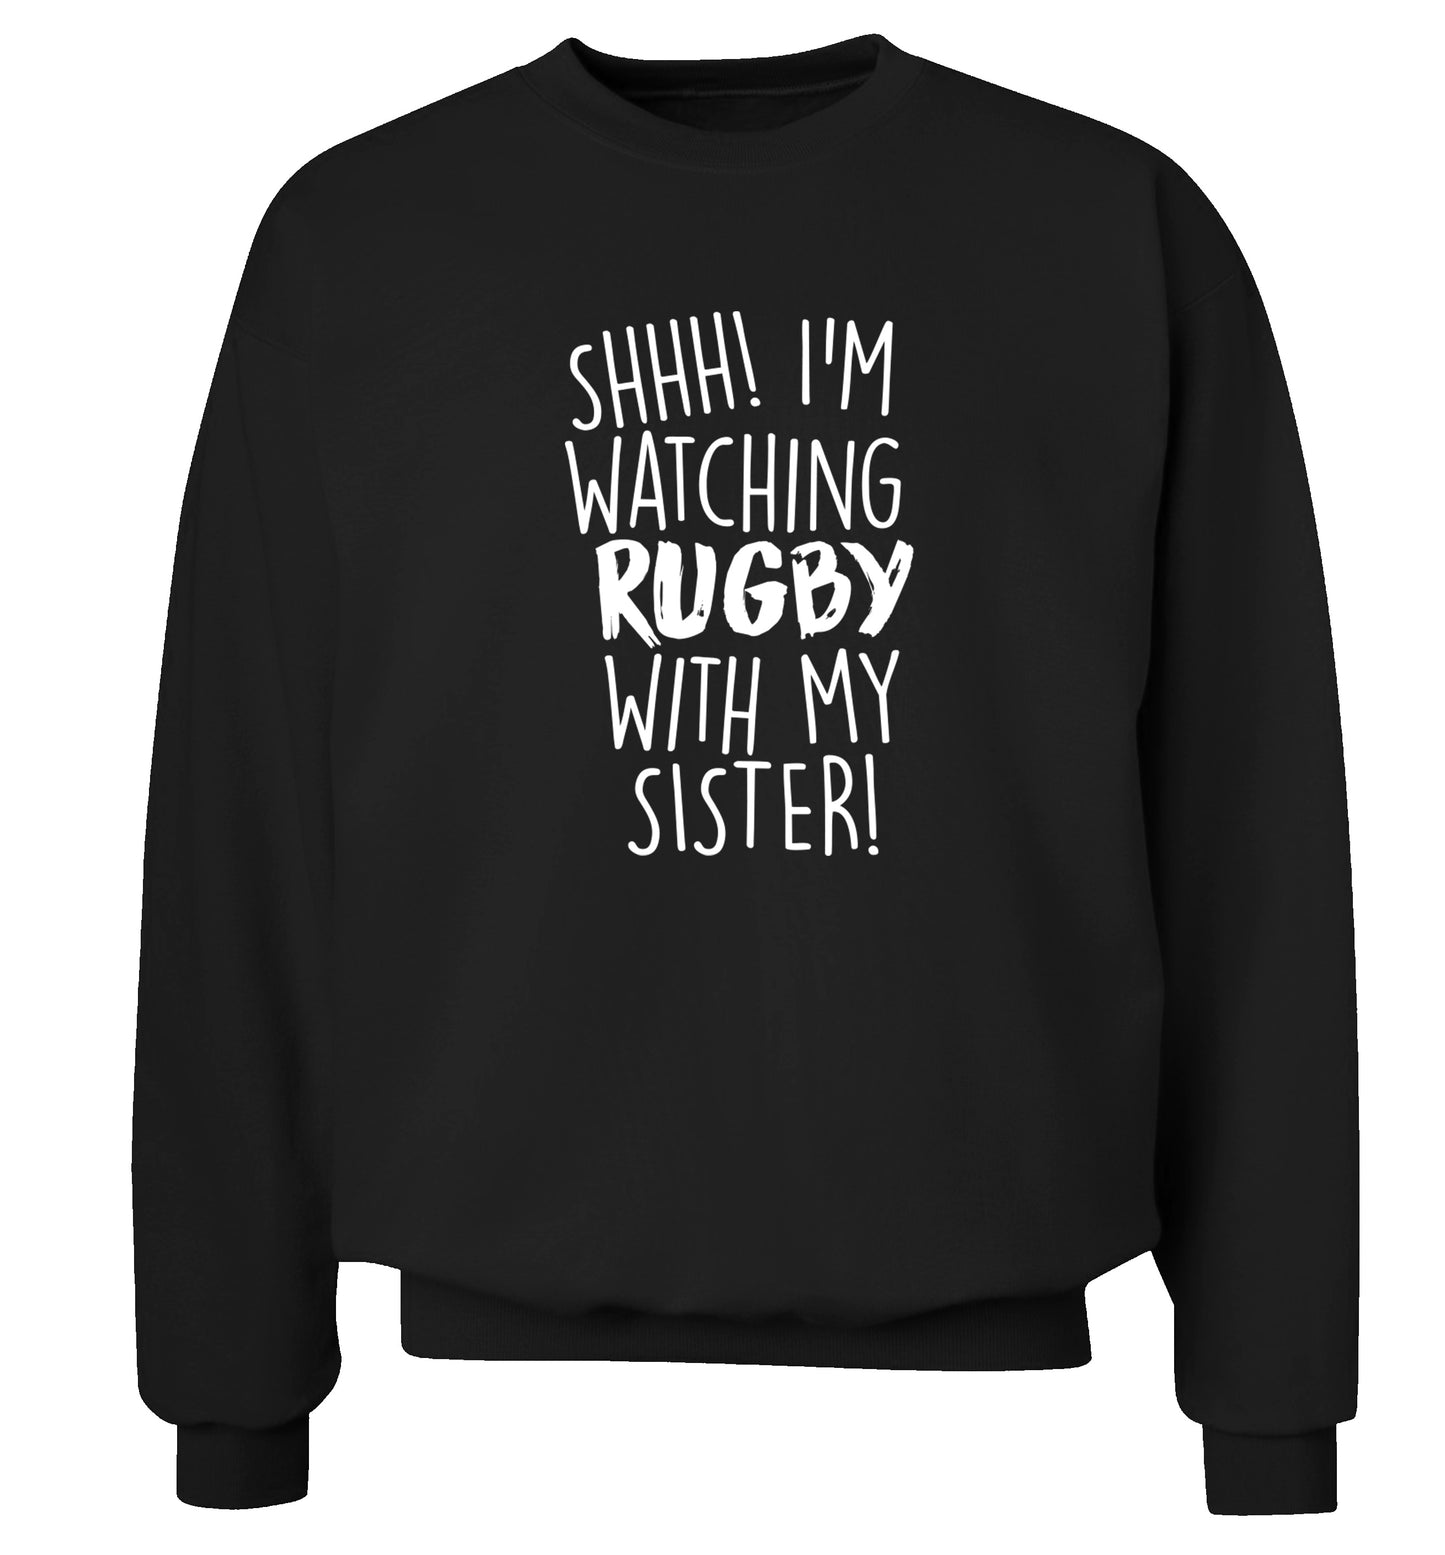 Shh... I'm watching rugby with my sister Adult's unisex black Sweater 2XL